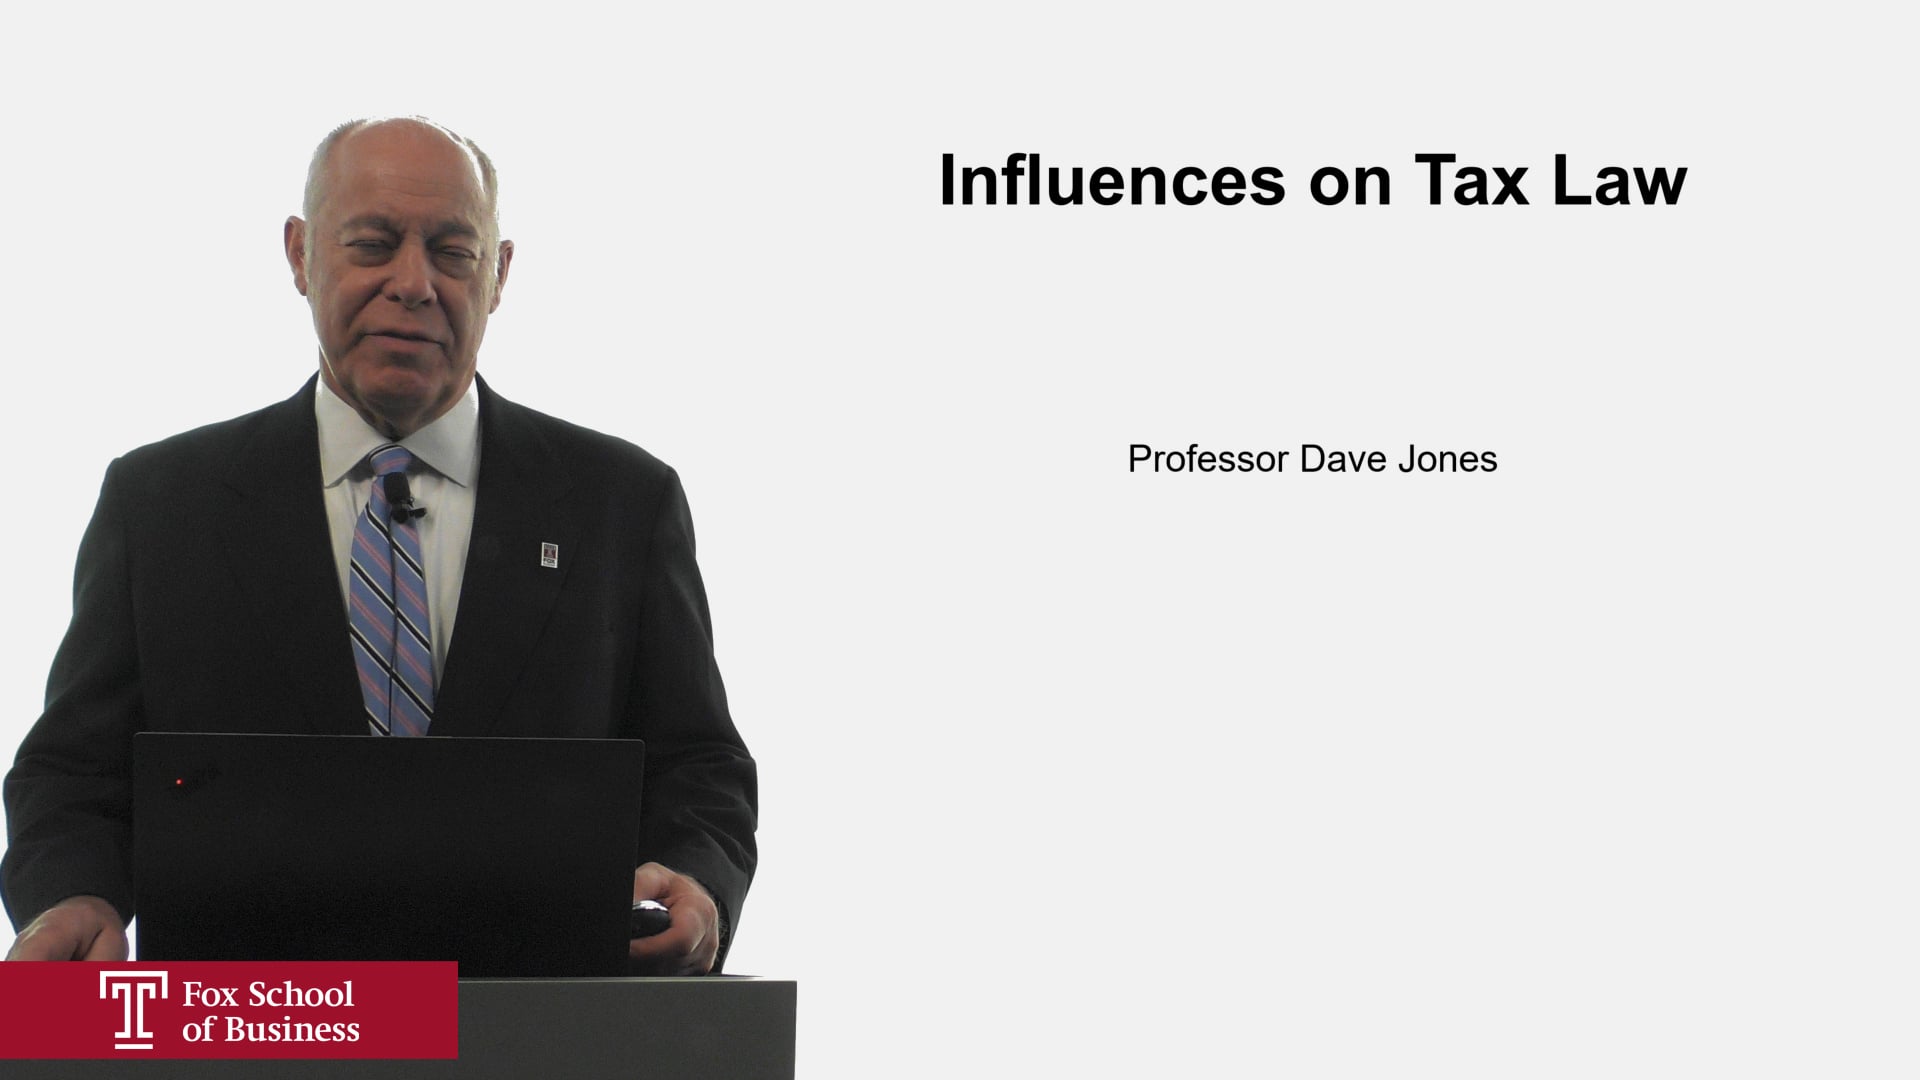 Influences of Tax Law